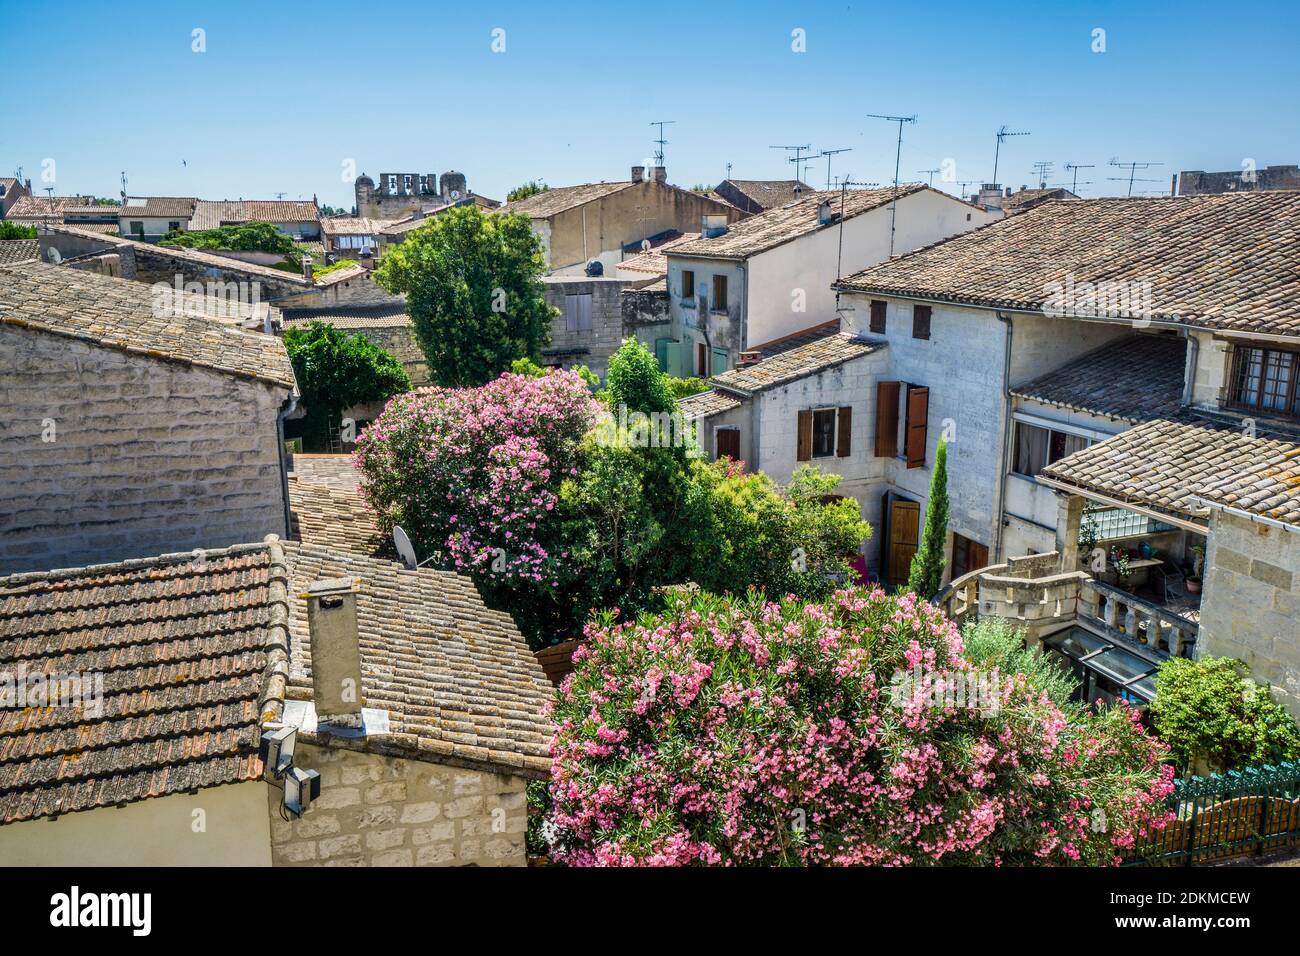 view over the roofs and backyards of the medieval walled town of Aigues-Mortes, Petite Camargue, Gard department, Occitanie region, Southern France Stock Photo